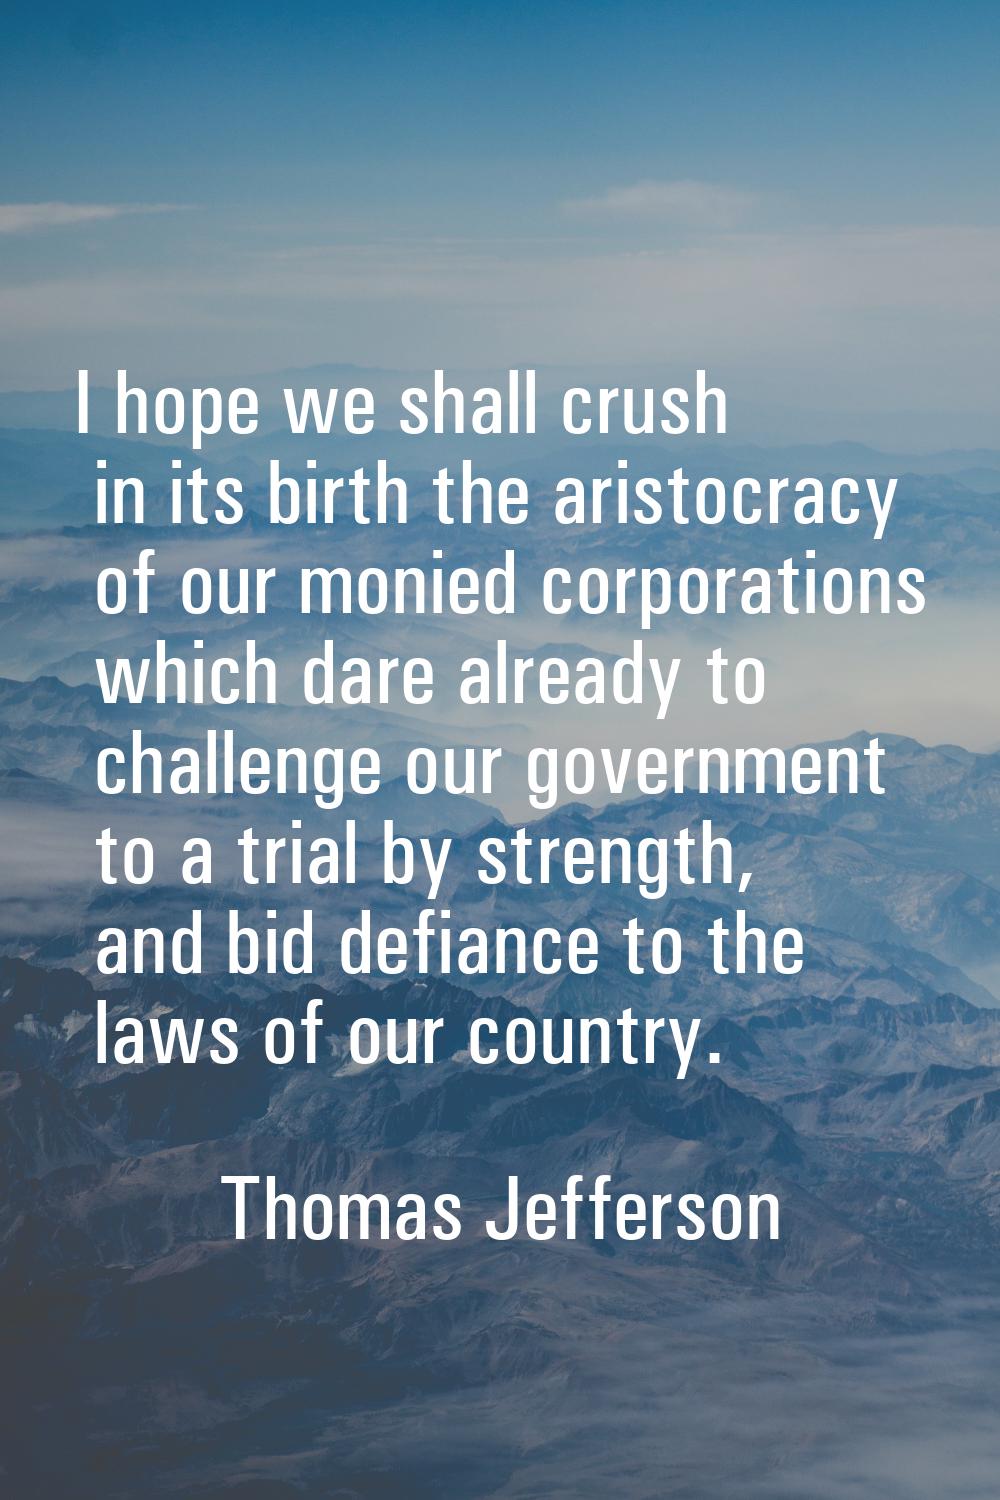 I hope we shall crush in its birth the aristocracy of our monied corporations which dare already to